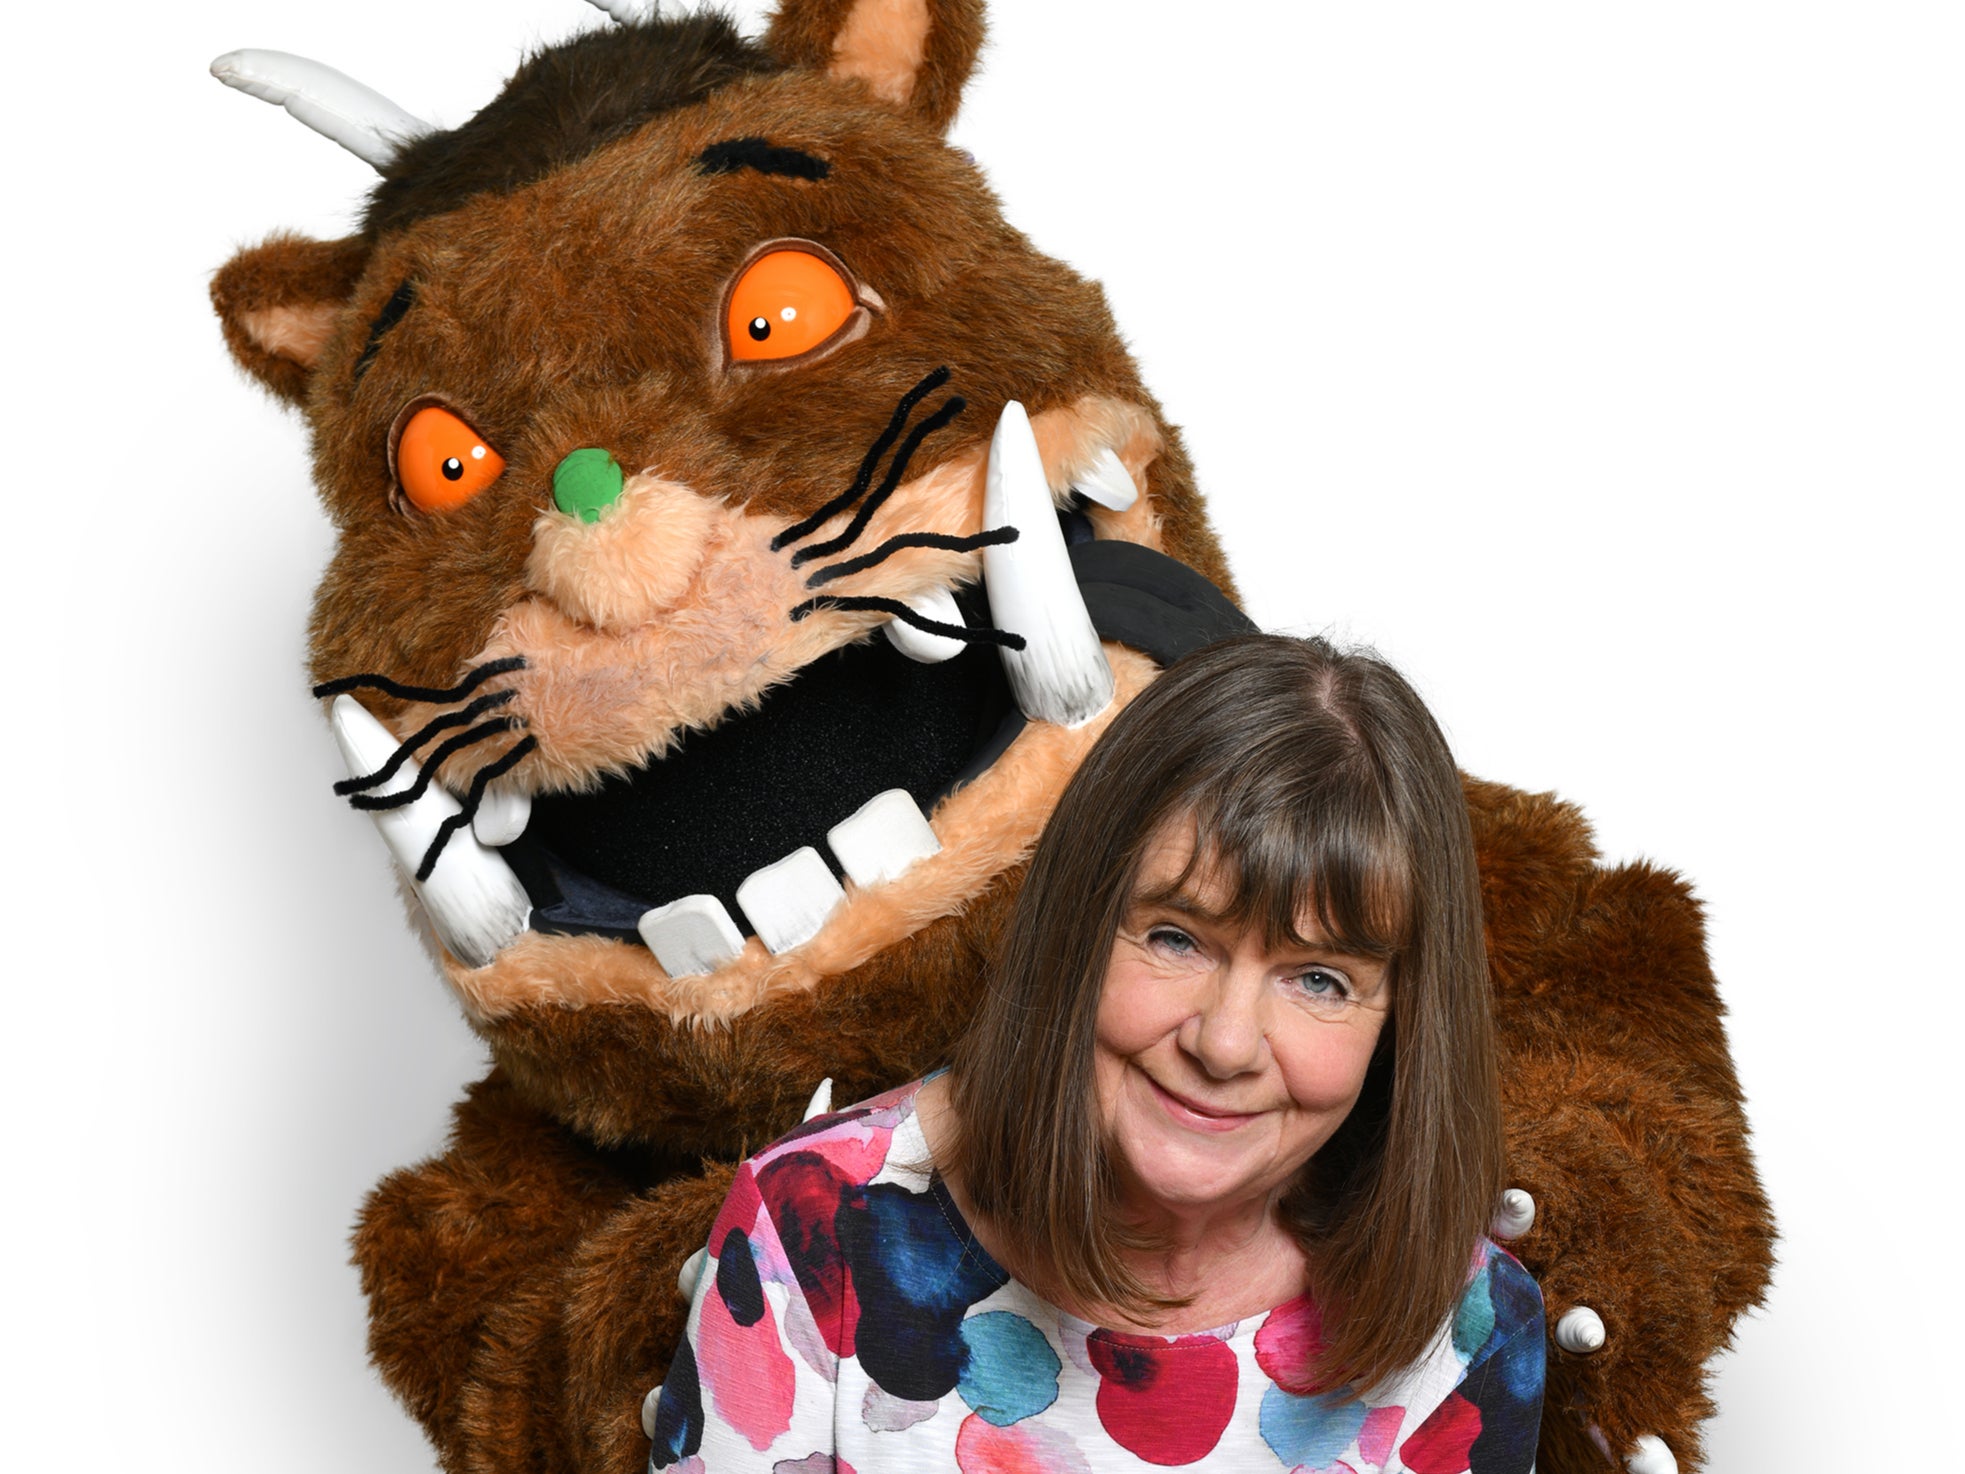 Julia Donaldson has sold more than 13 million copies of her book ‘The Gruffalo’